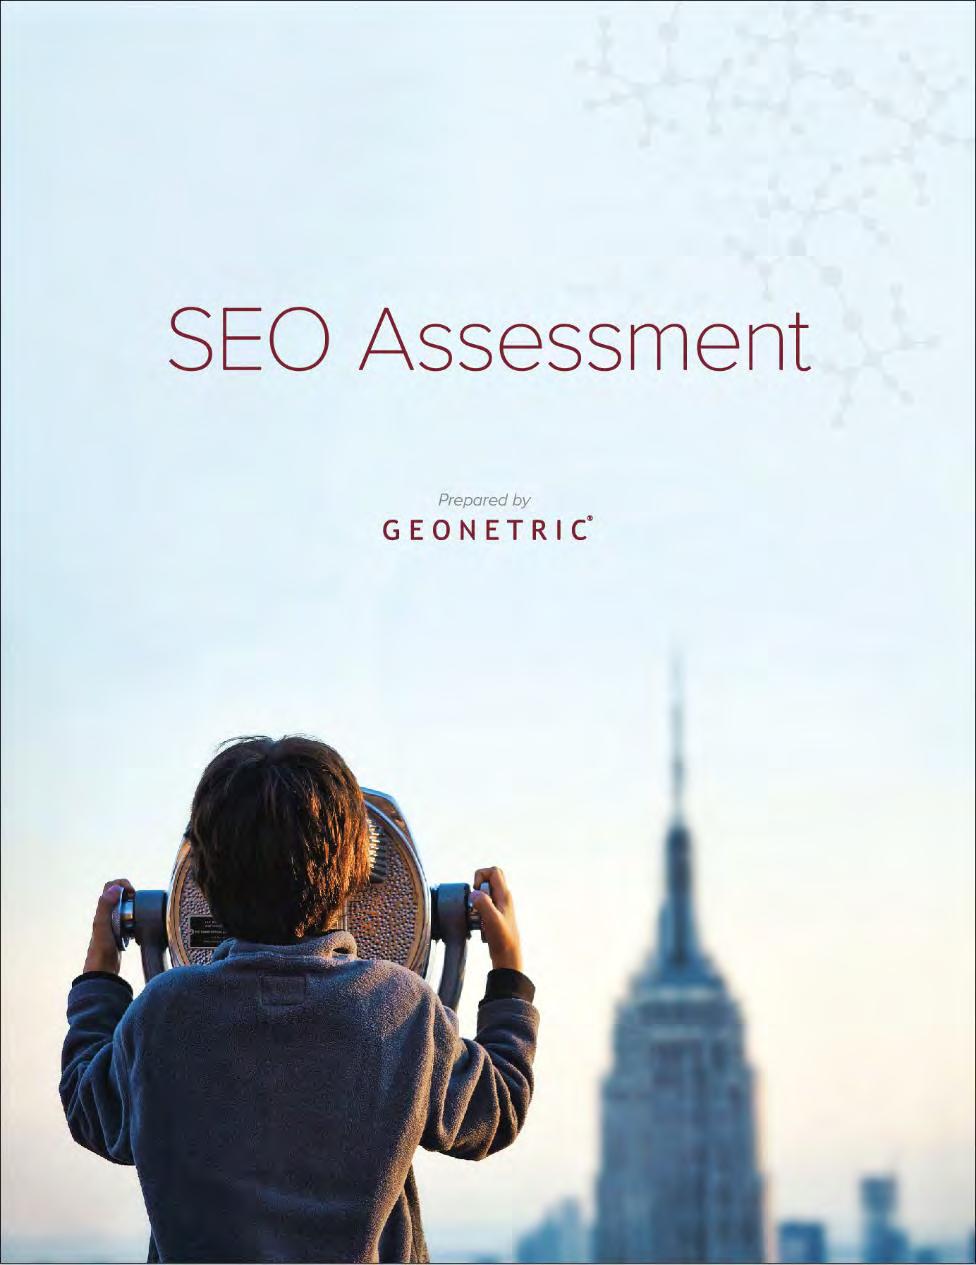 Free Giveaway: SEO Assessment To enter: Check